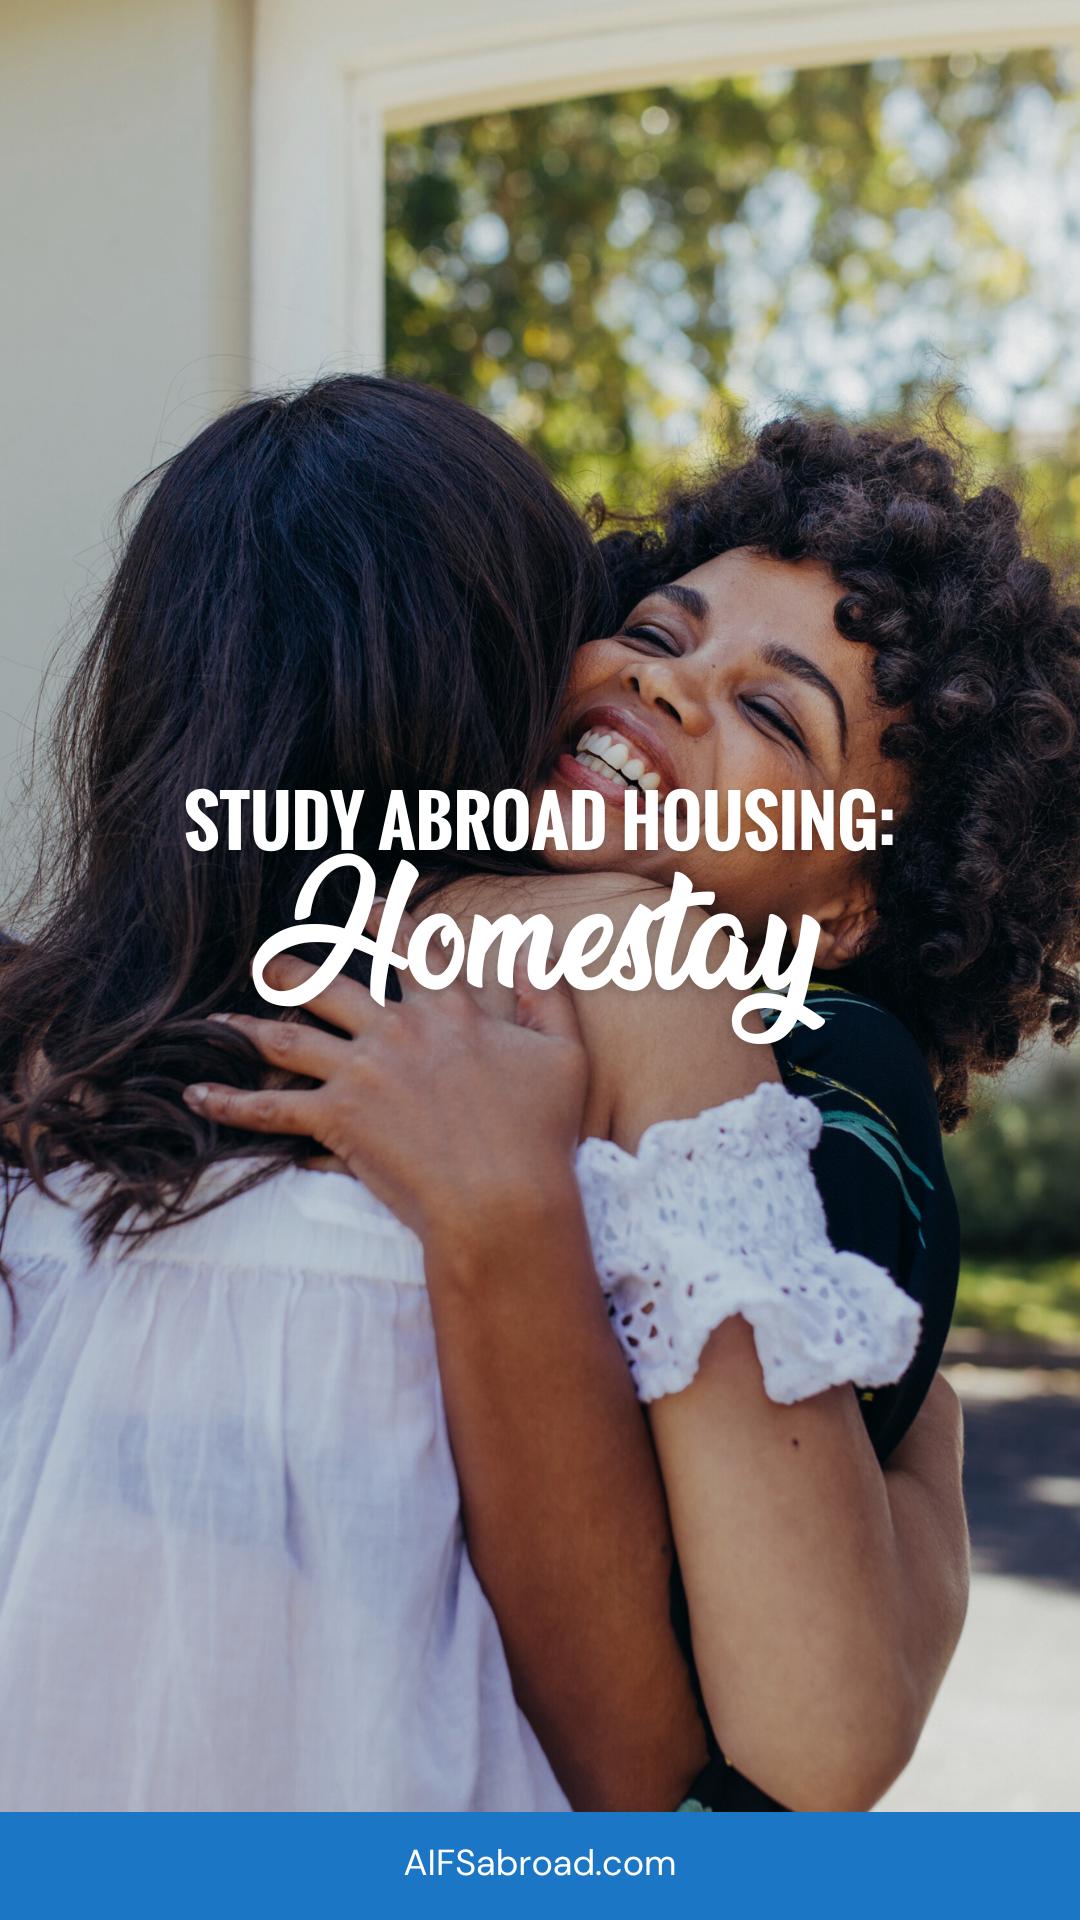 pin image: two women hugging wit text "study abroad housing: homestay" overlay